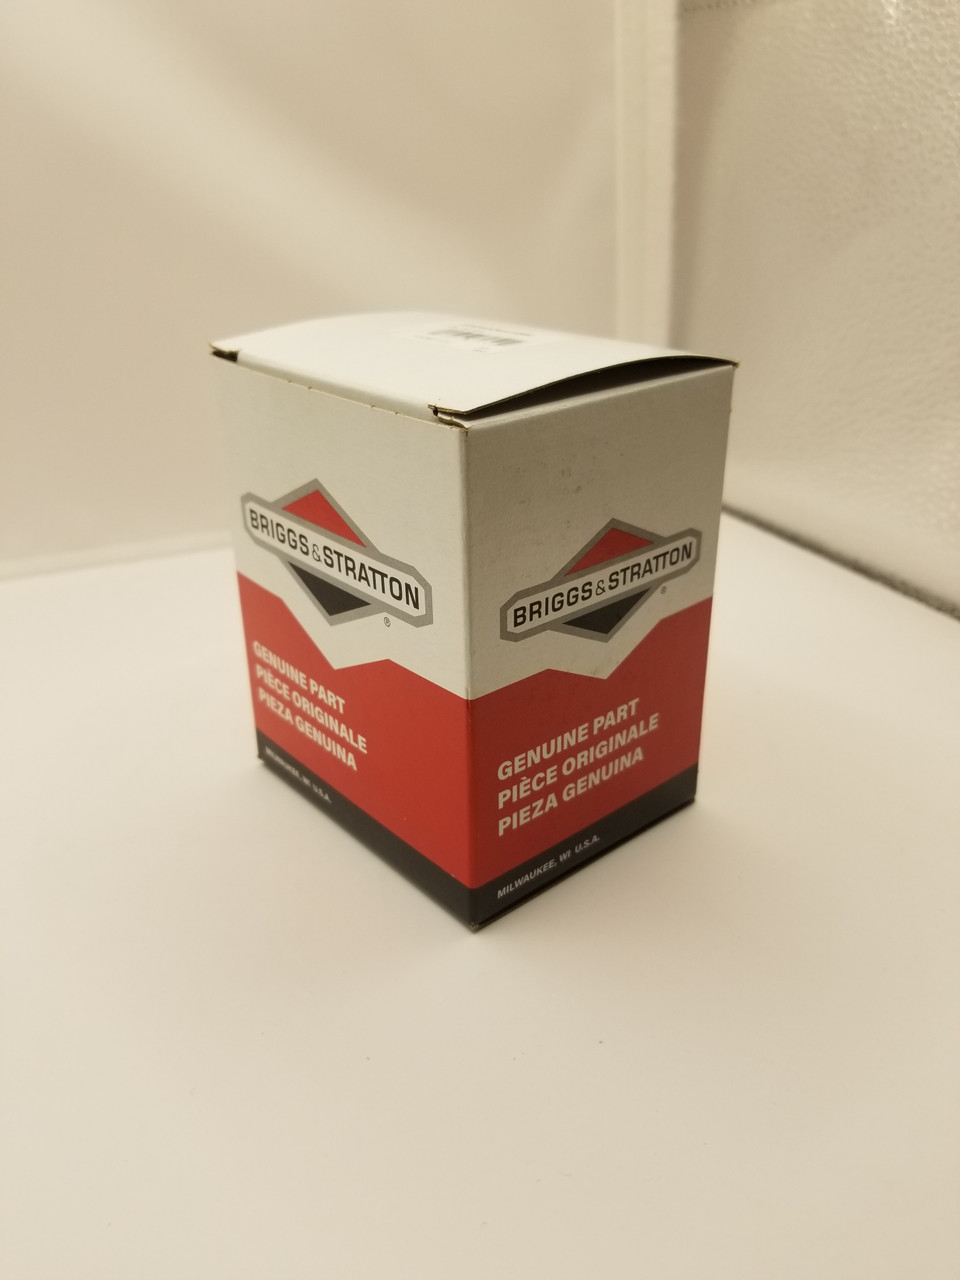 ENGINE PACKED SINGLE CARTON - 15C112-3006-F8 package std